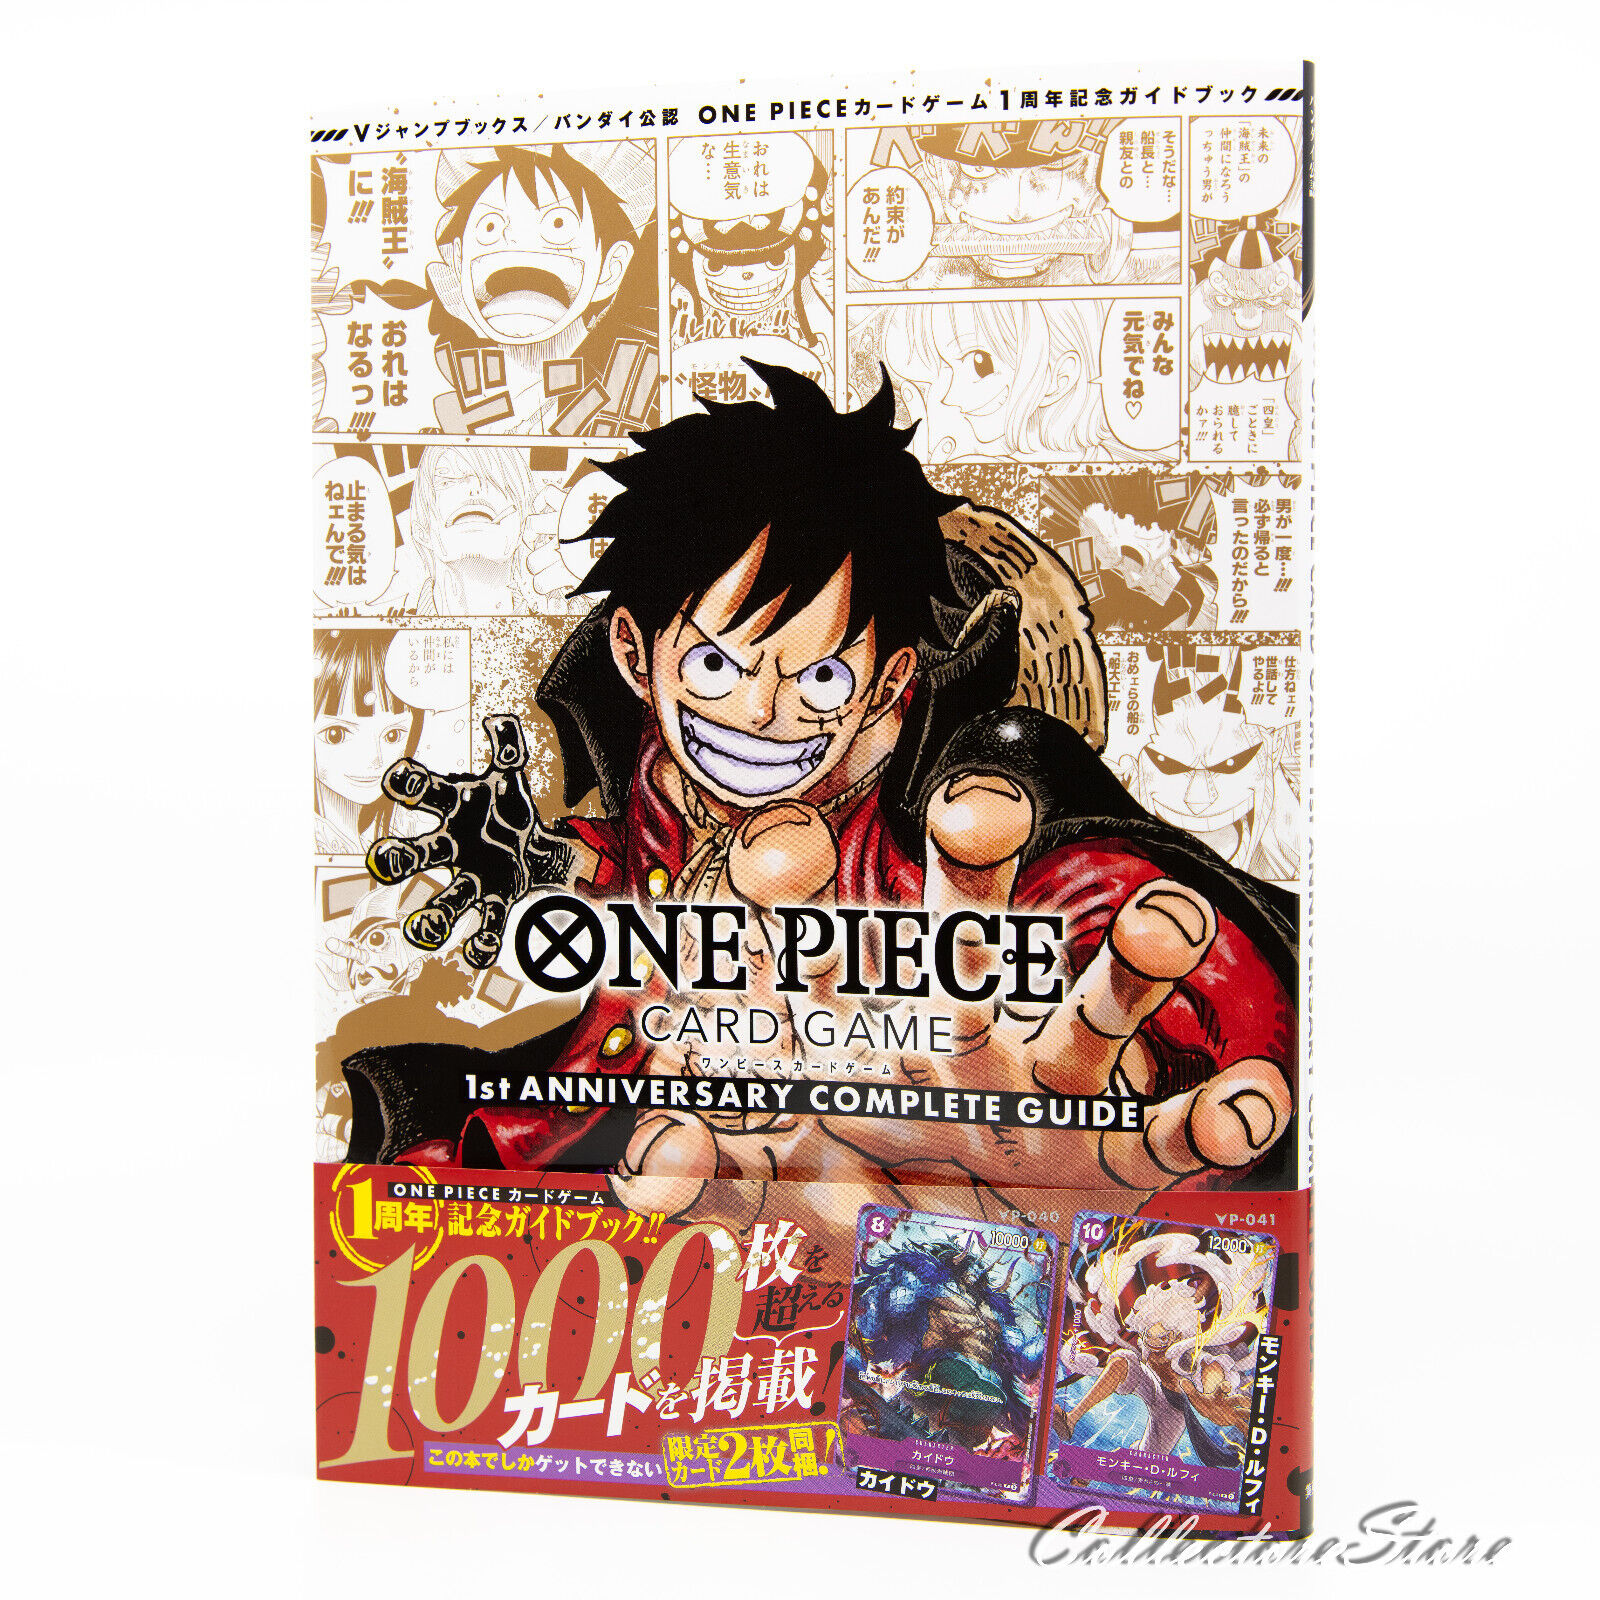 One Piece Card Game 1st Anniversary Complete Guide Book w/ Cards (AIR/DHL)